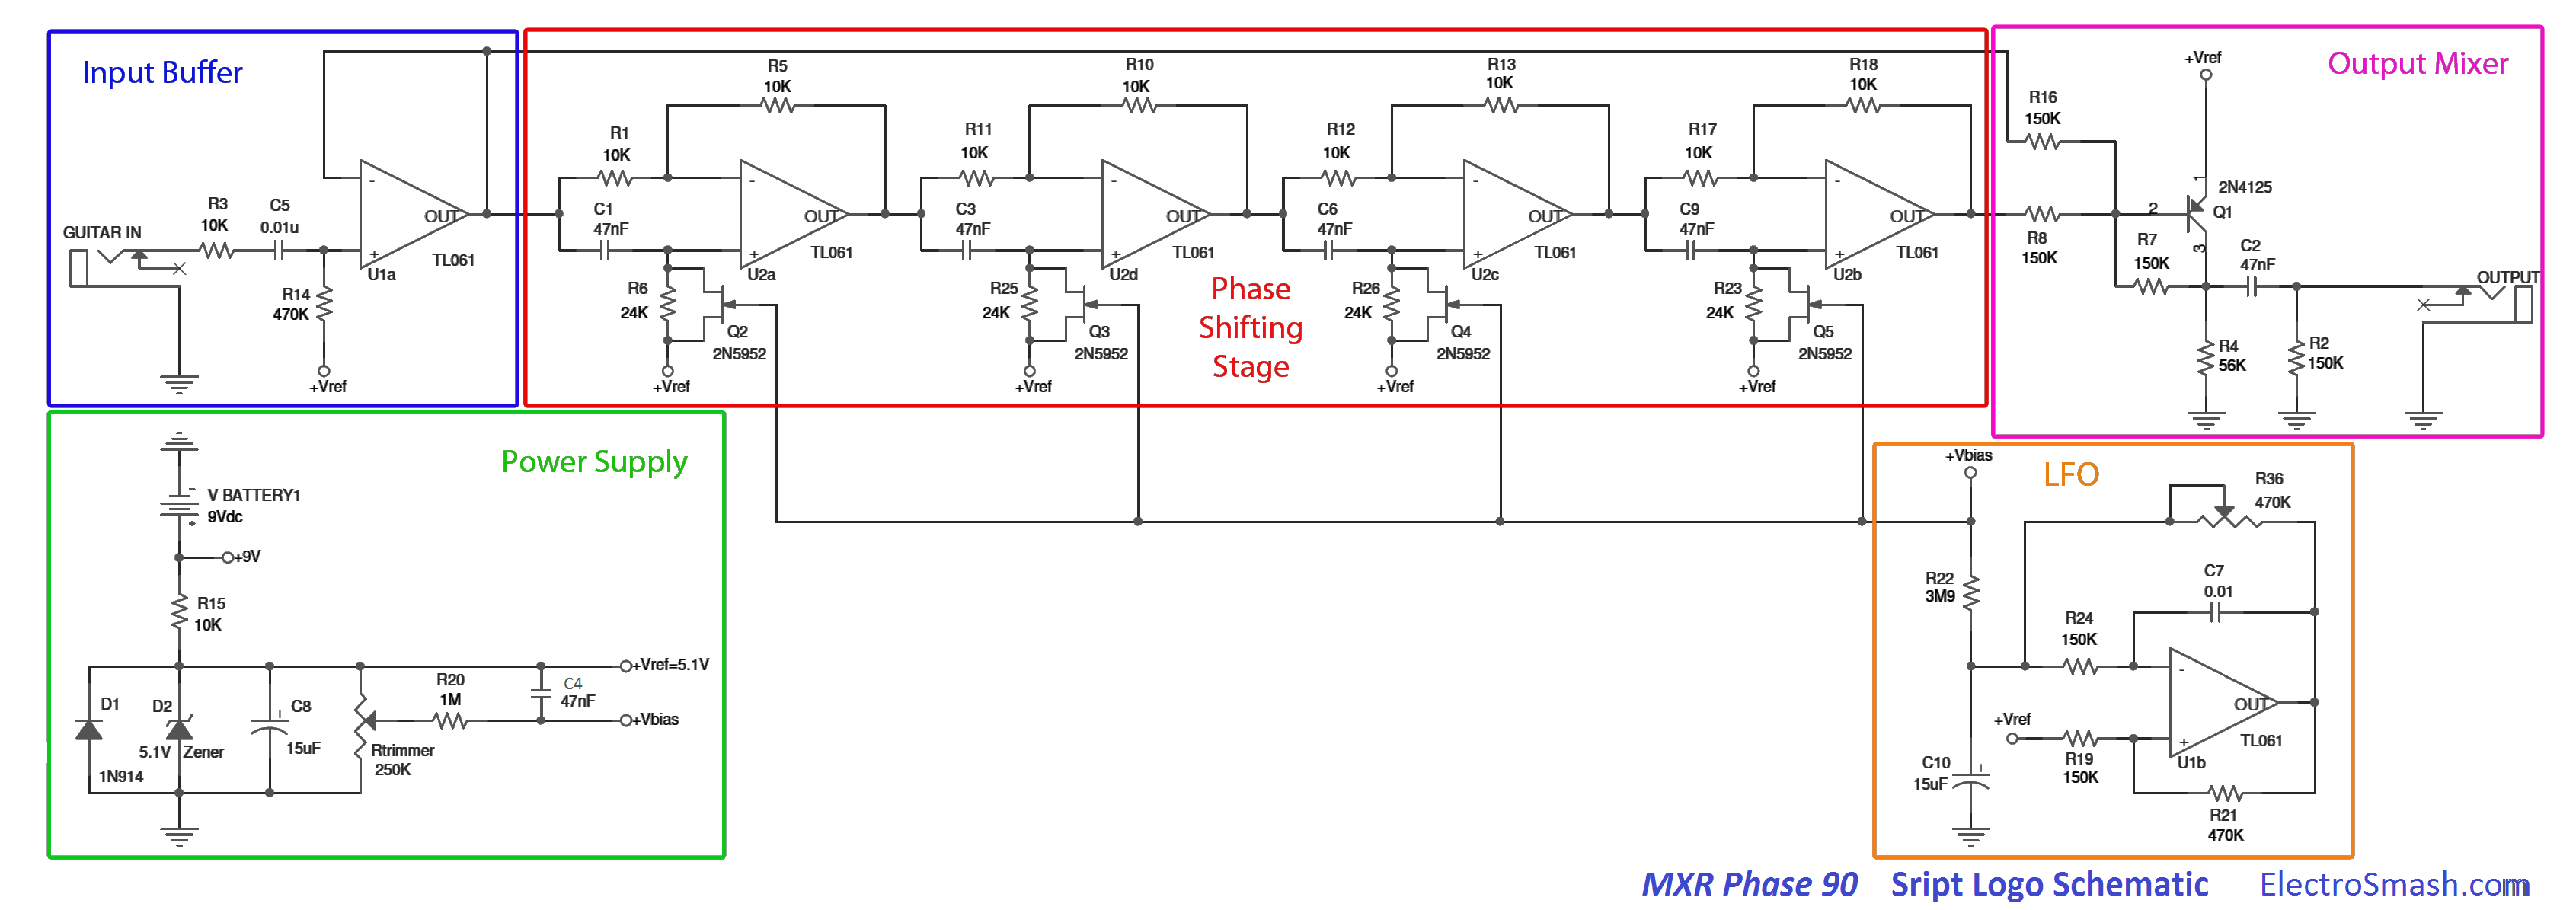 Phase 90 add 4 stages troubleshooting